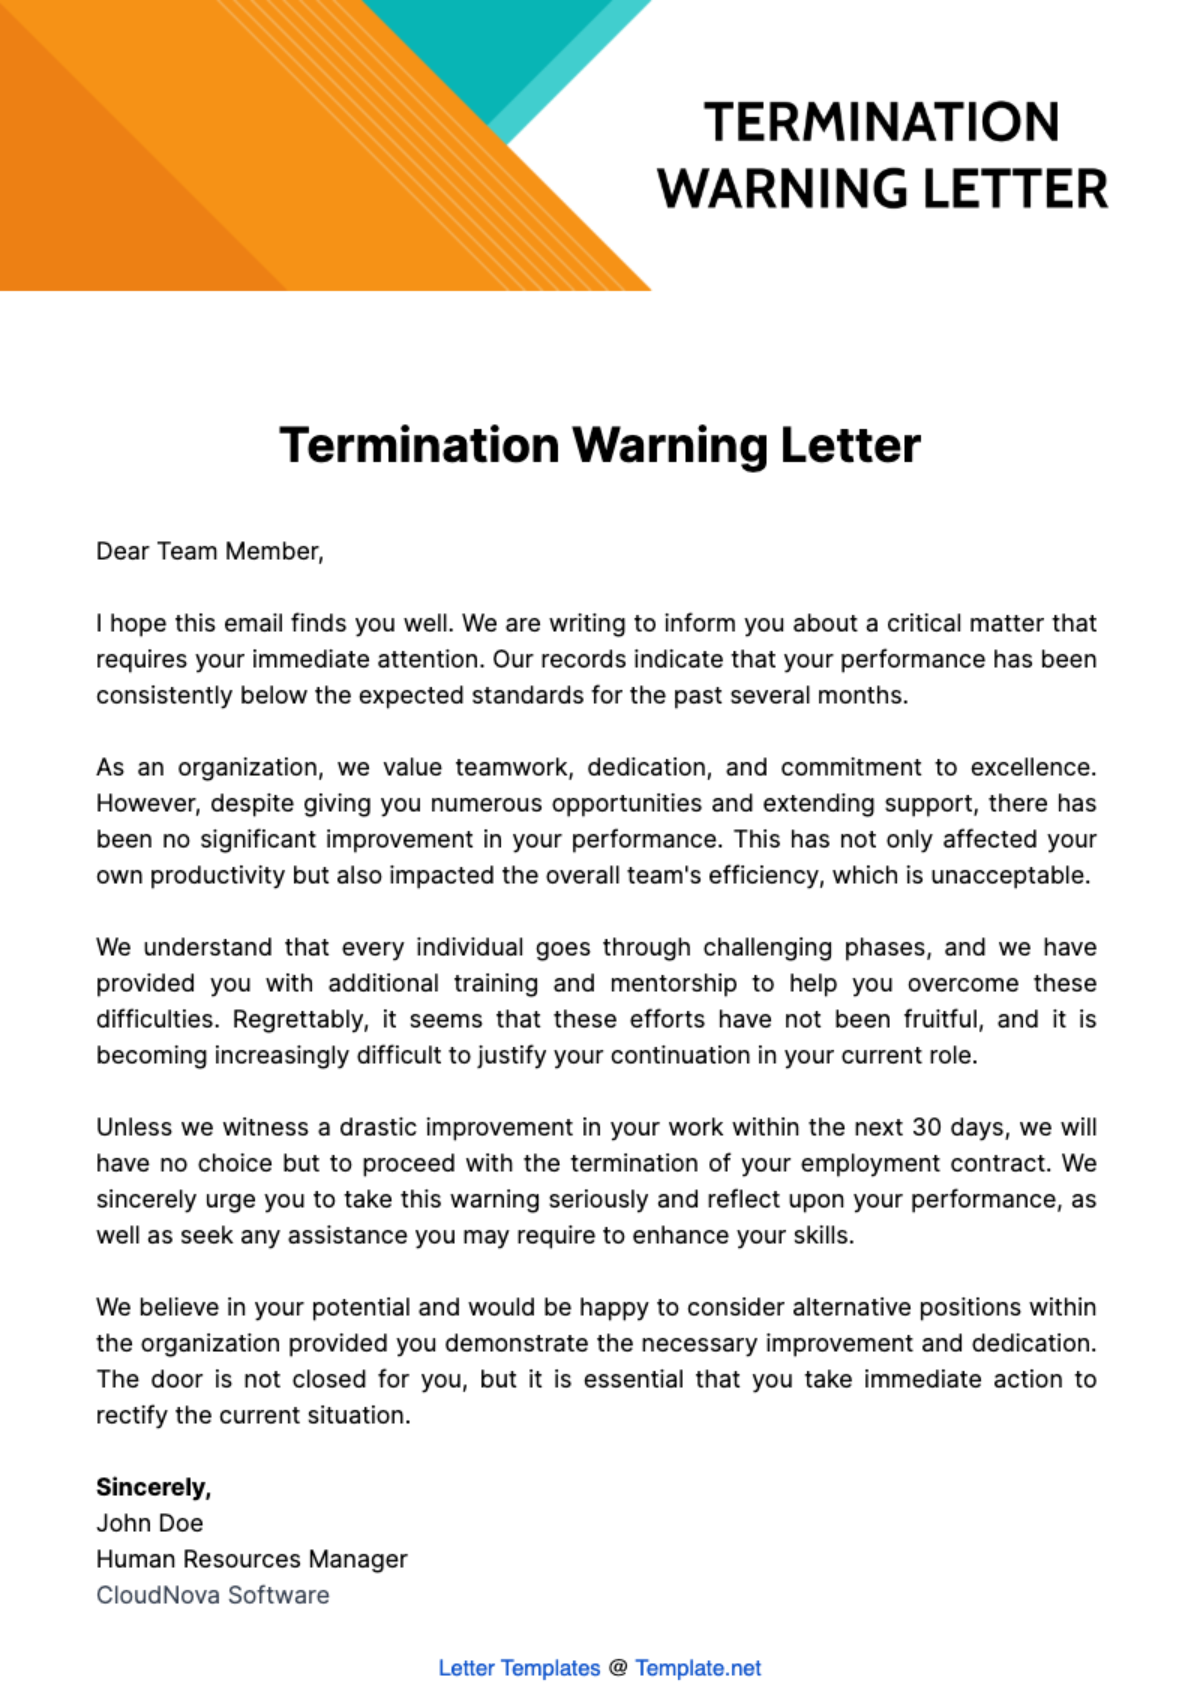 Free Termination Warning Letter Template